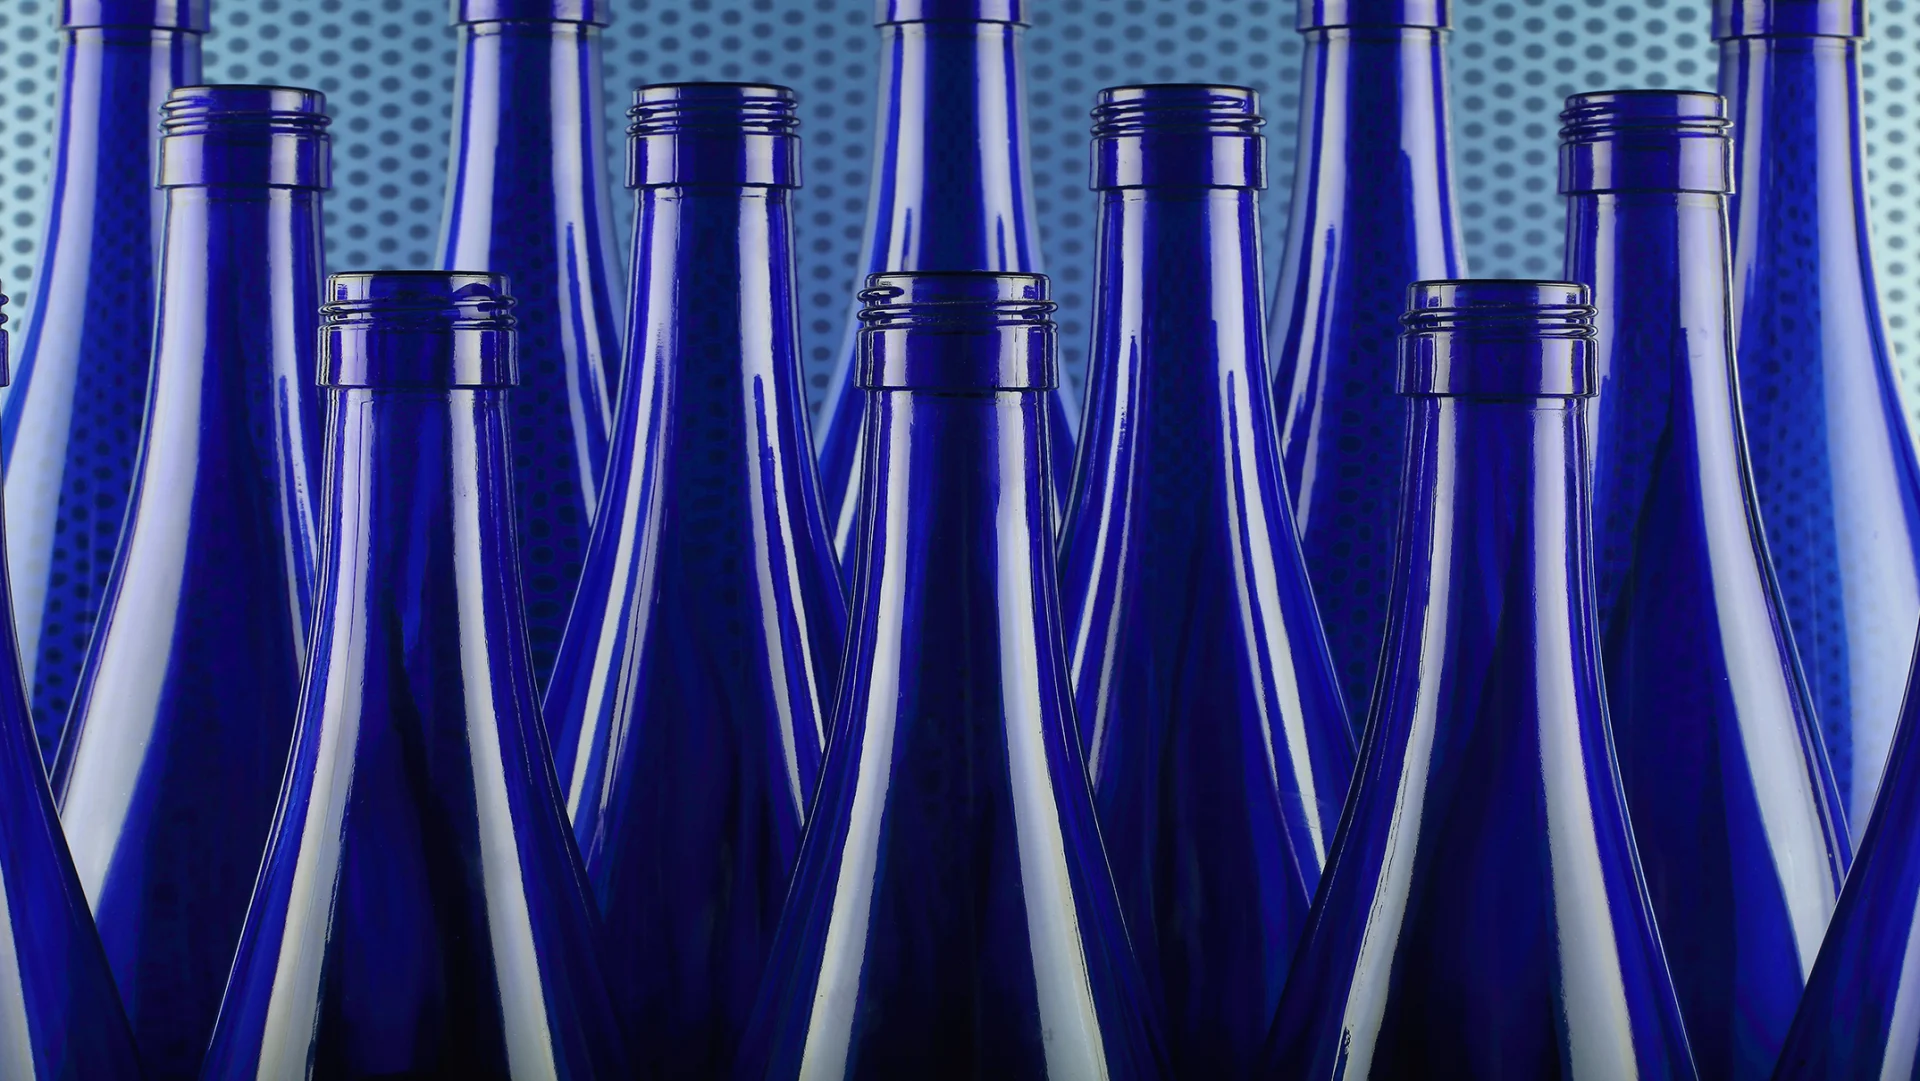 Blue glass bottles stood closely to one another